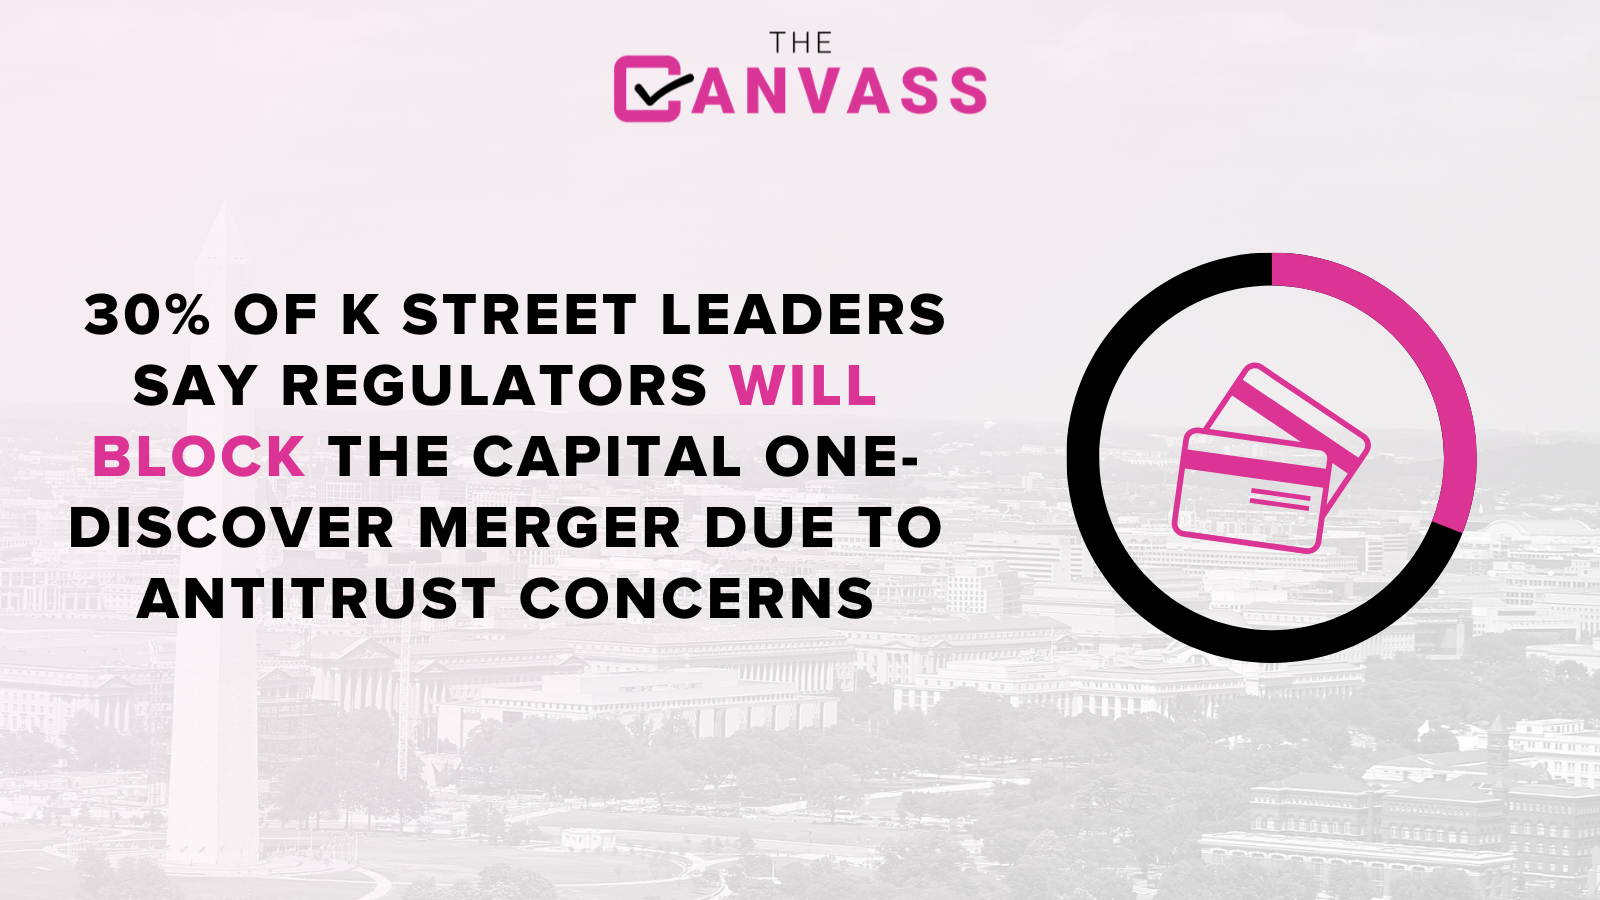 A total of 30% of K Street leaders surveyed said they expected the Capital One-Discover merger to be blocked by regulators “due to antitrust concerns.”